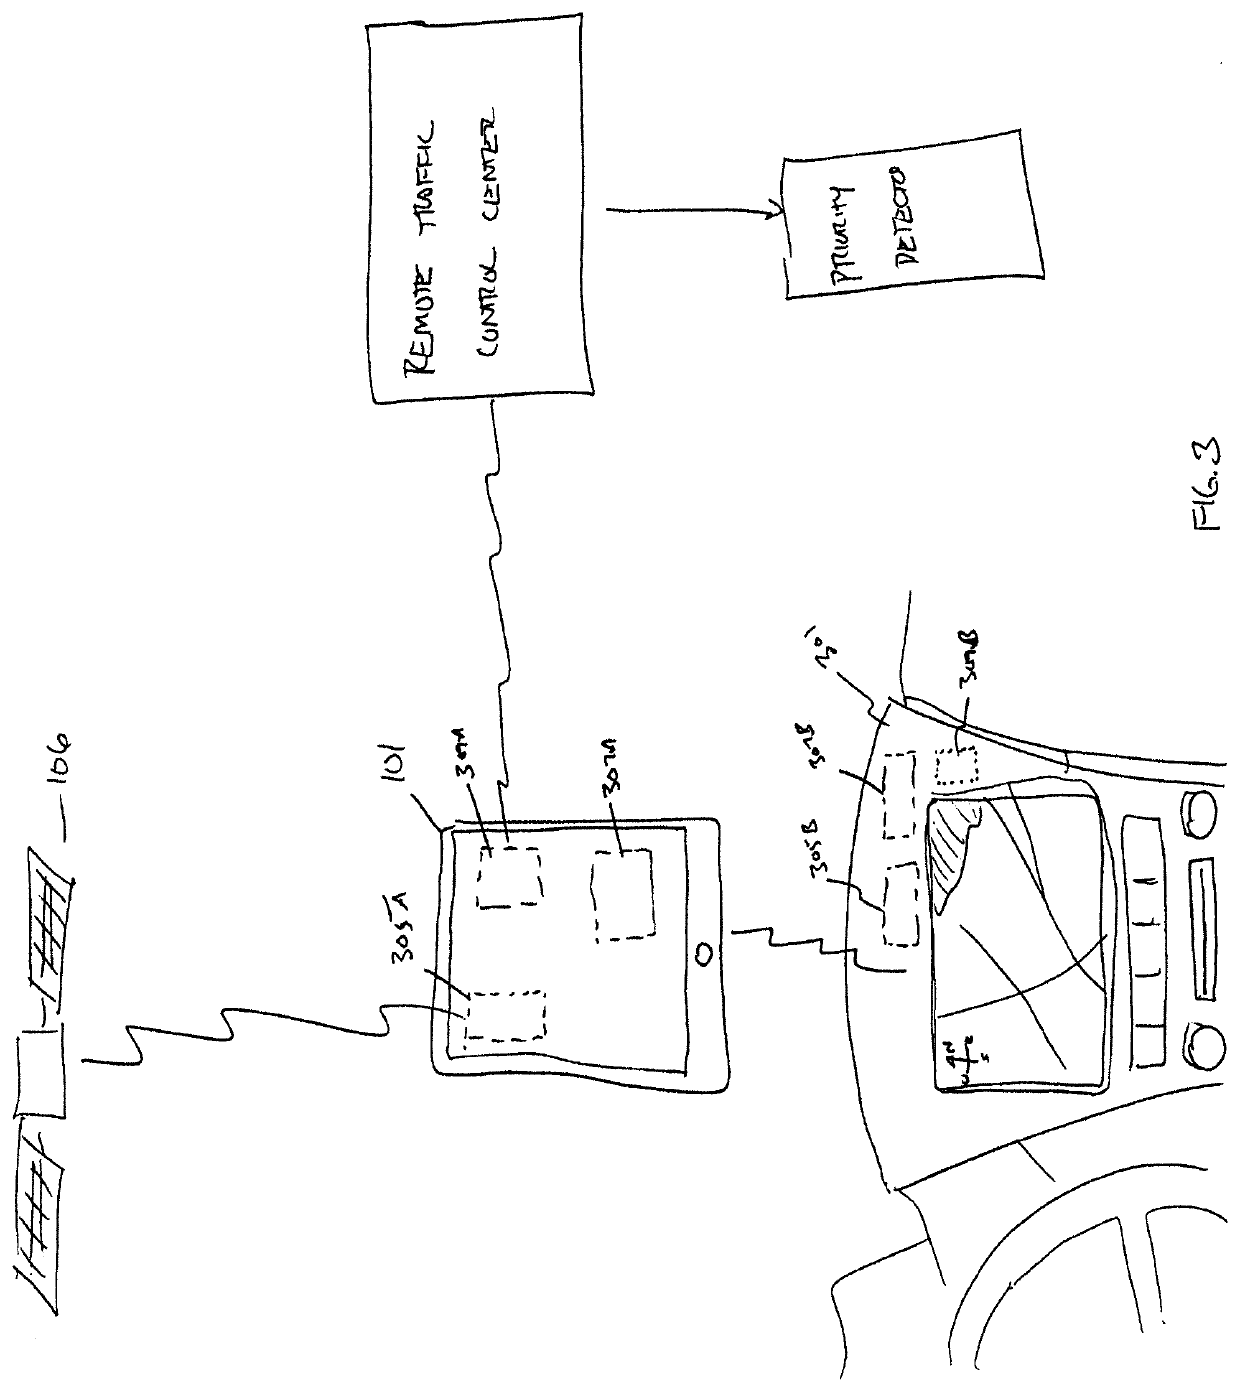 Systems and methods to temporarily alter traffic flow